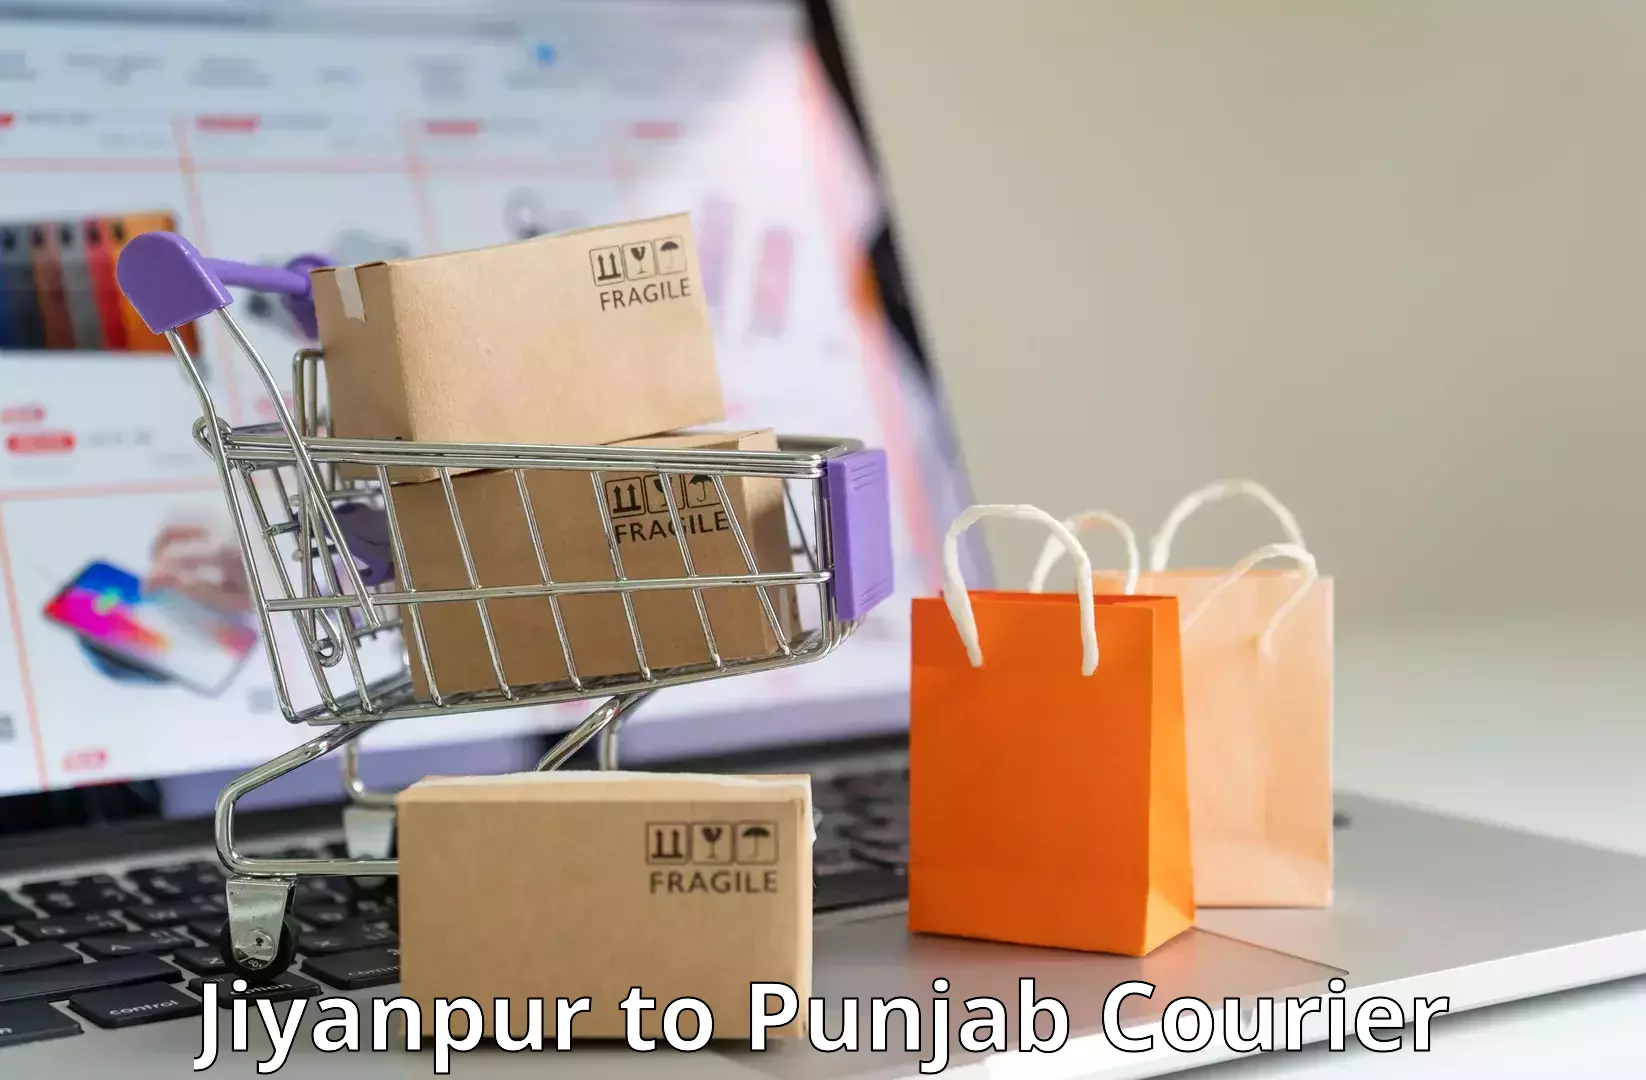 Streamlined logistics management Jiyanpur to Sultanpur Lodhi